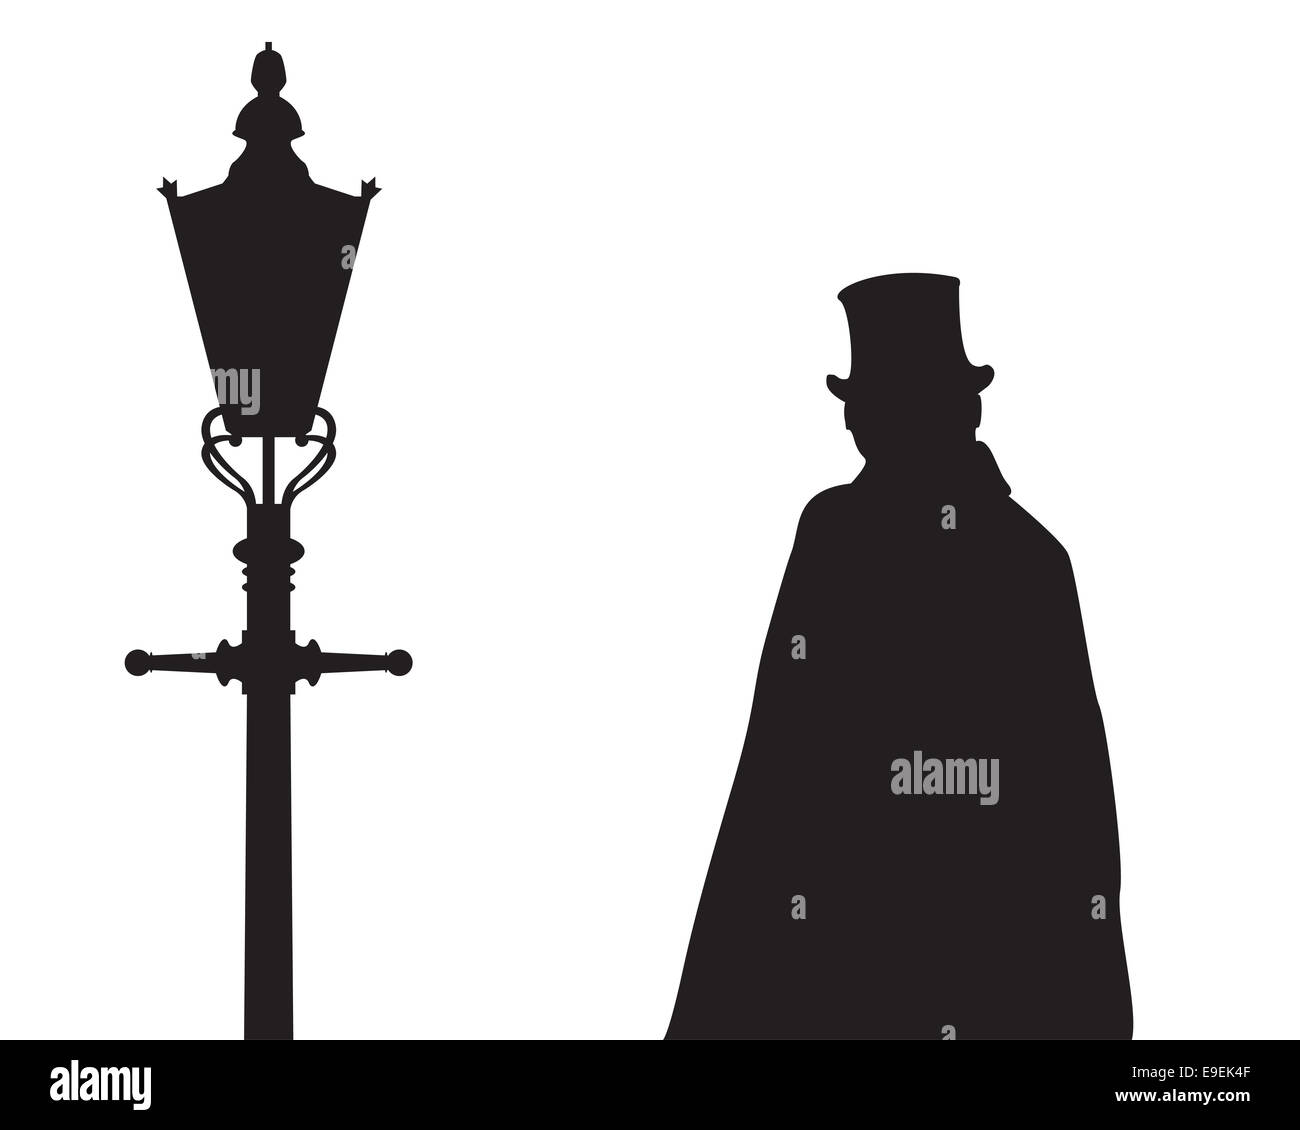 A silhouette of Jack the ripper next to a traditional old street light isolated on a white background Stock Photo